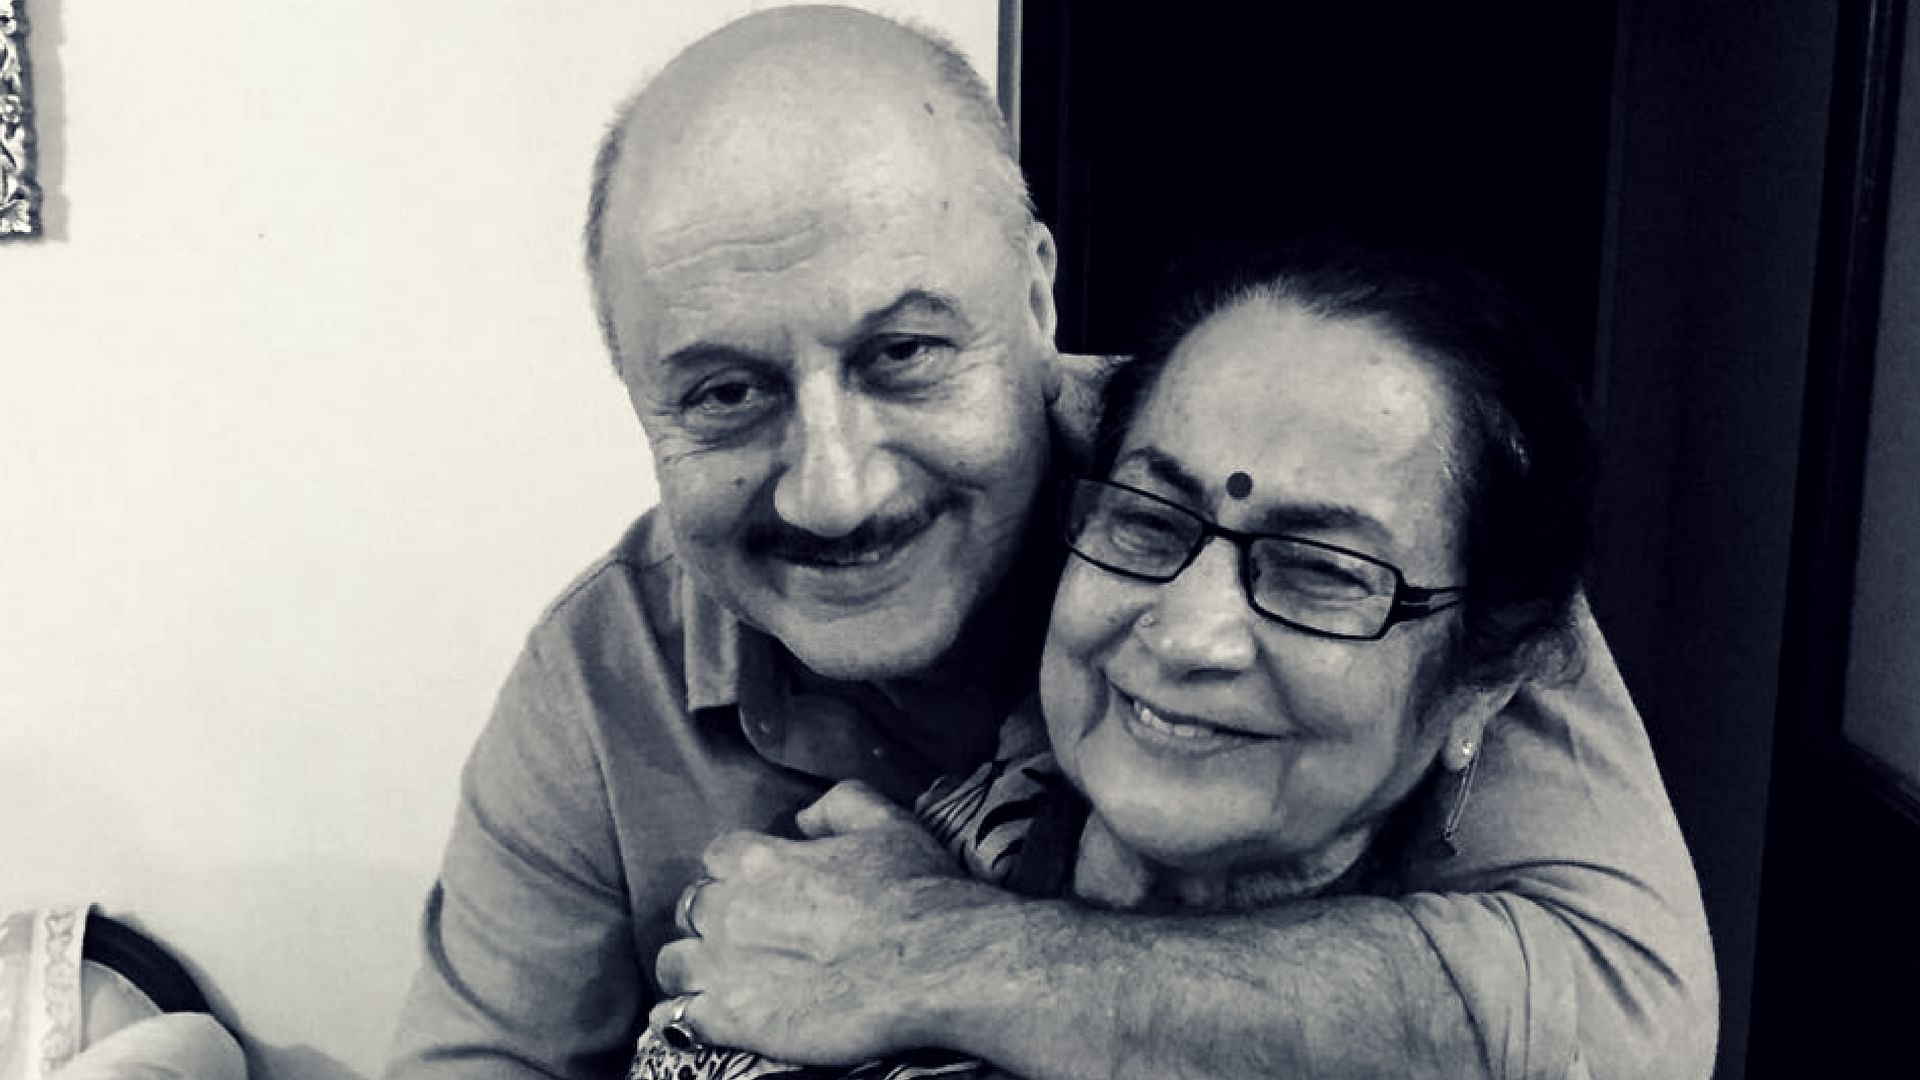 Anupam Kher’s mother fondly remembers her late husband in a candid chat. (Photo courtesy: <a href="https://www.instagram.com/p/BLocqcsAoHl/?taken-by=anupampkher&amp;hl=en">Instagram/@anupampkher</a>)